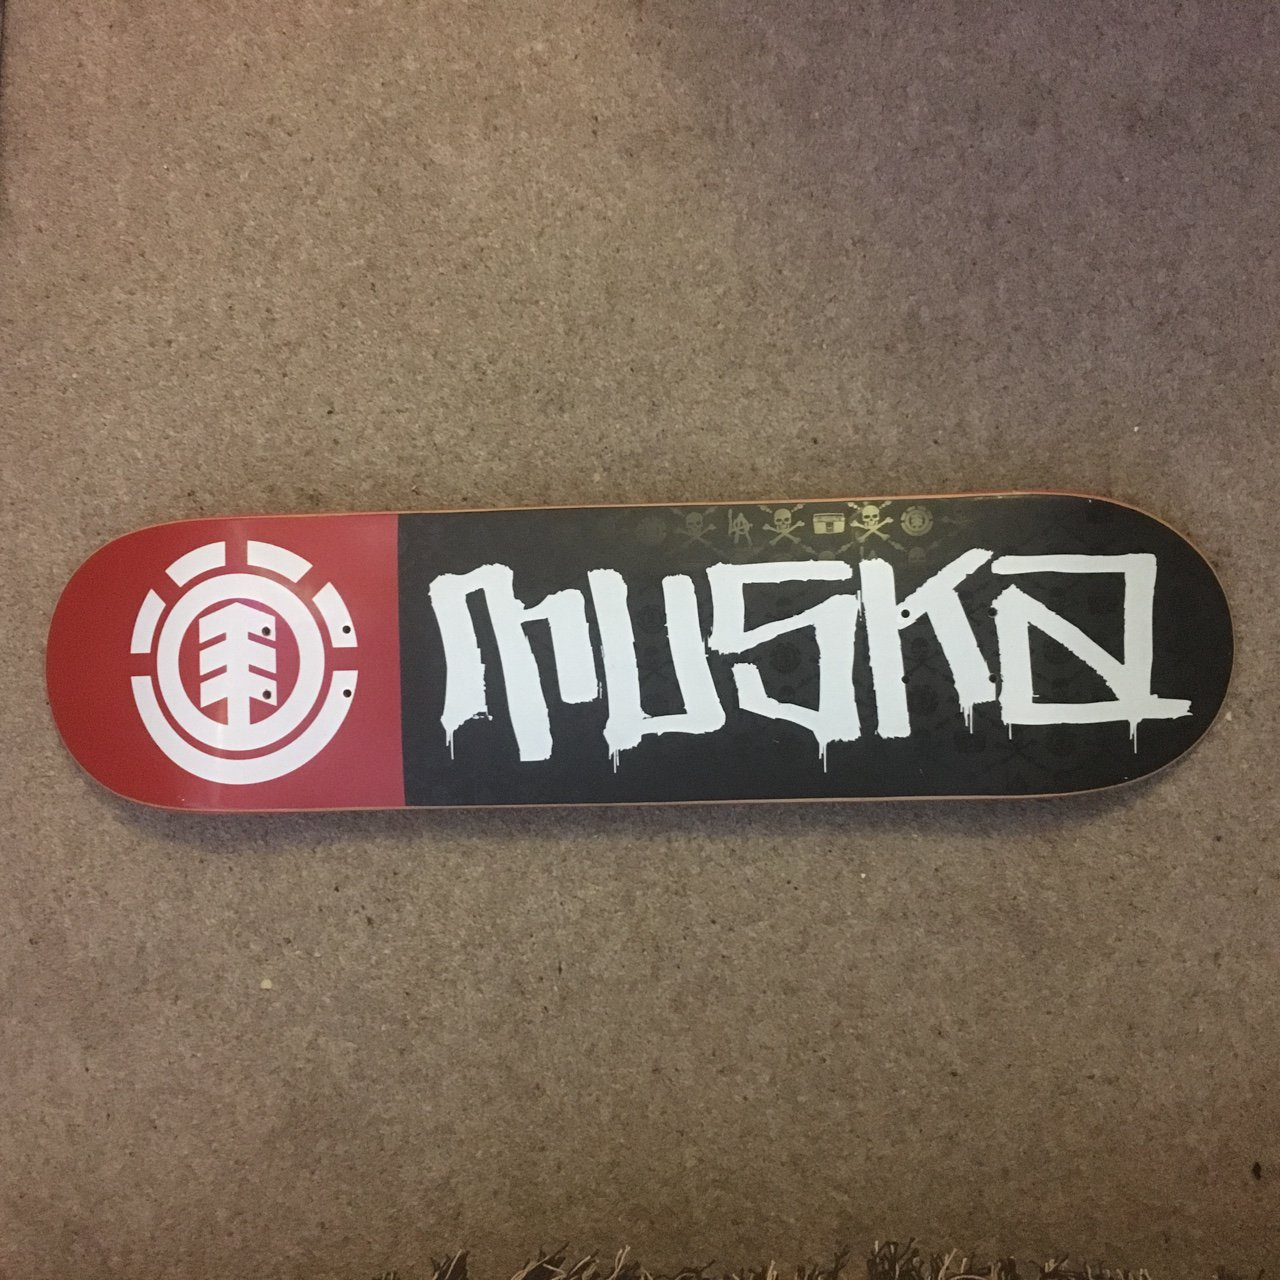 Rare Element Chad Muska Skateboard Deck Size 775 Message Depop with dimensions 1280 X 1280